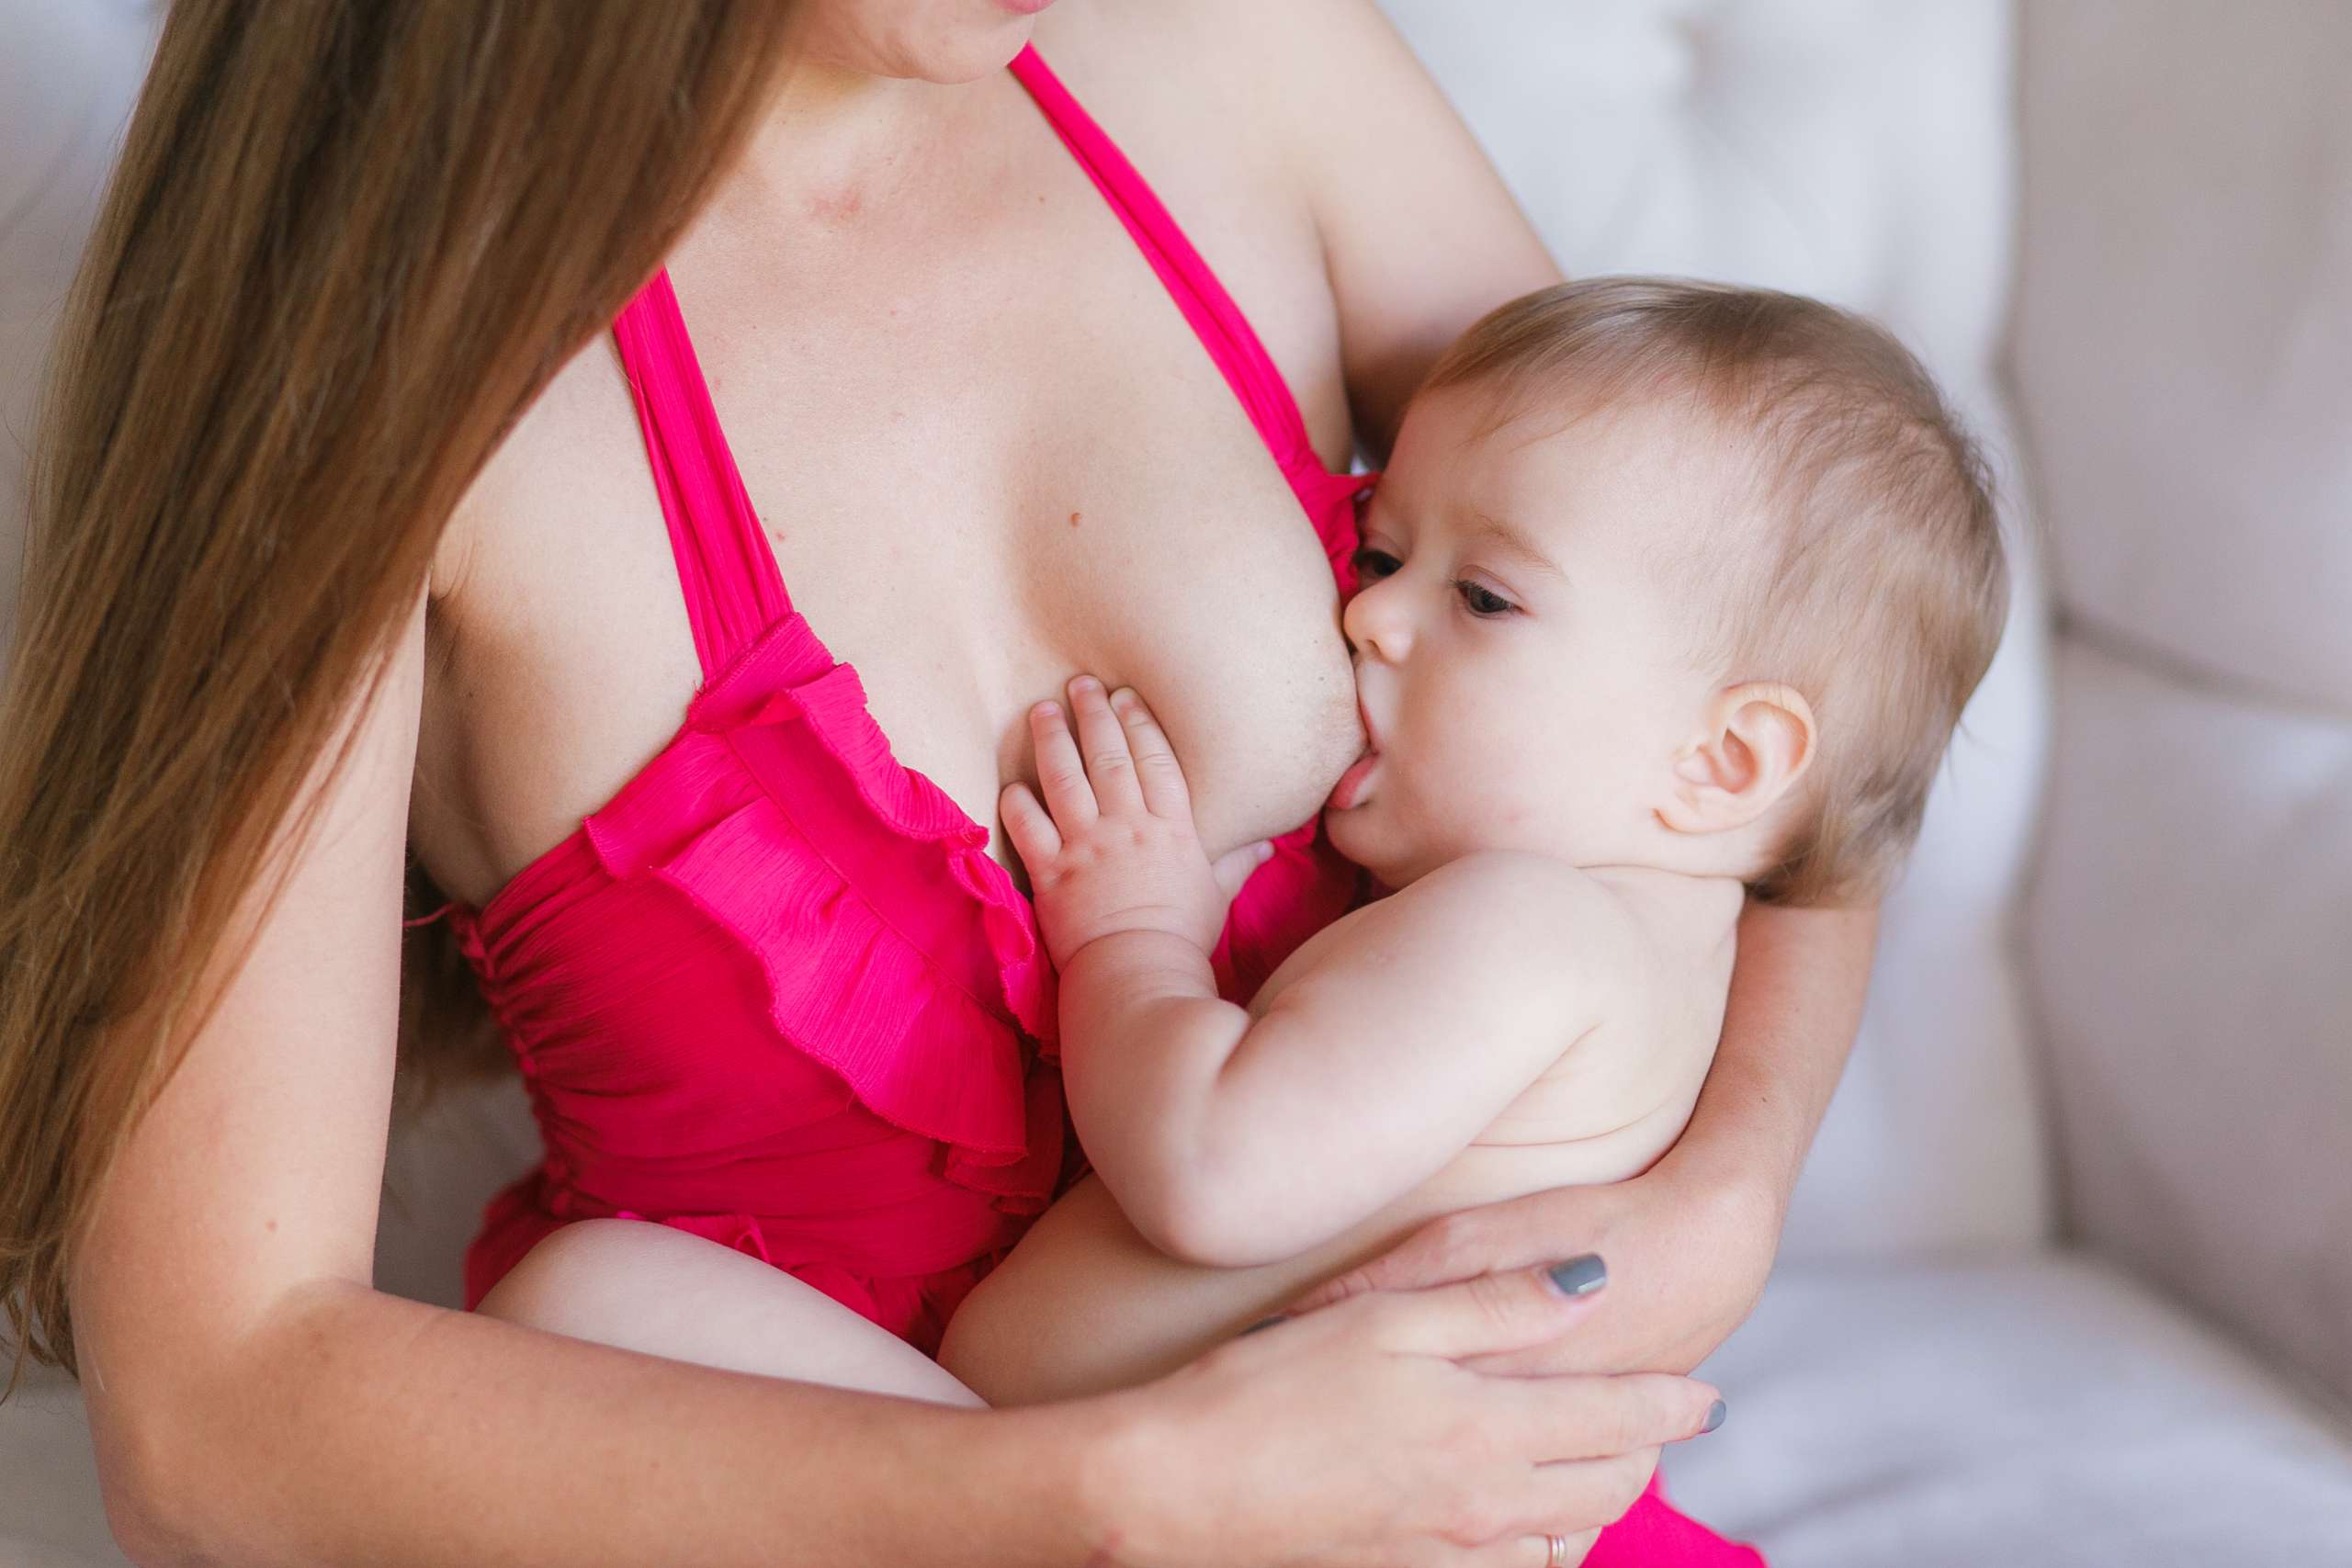 Young woman breastfeeding her little baby at home, closeup. Wearing pink dress-Menstrual Regularity